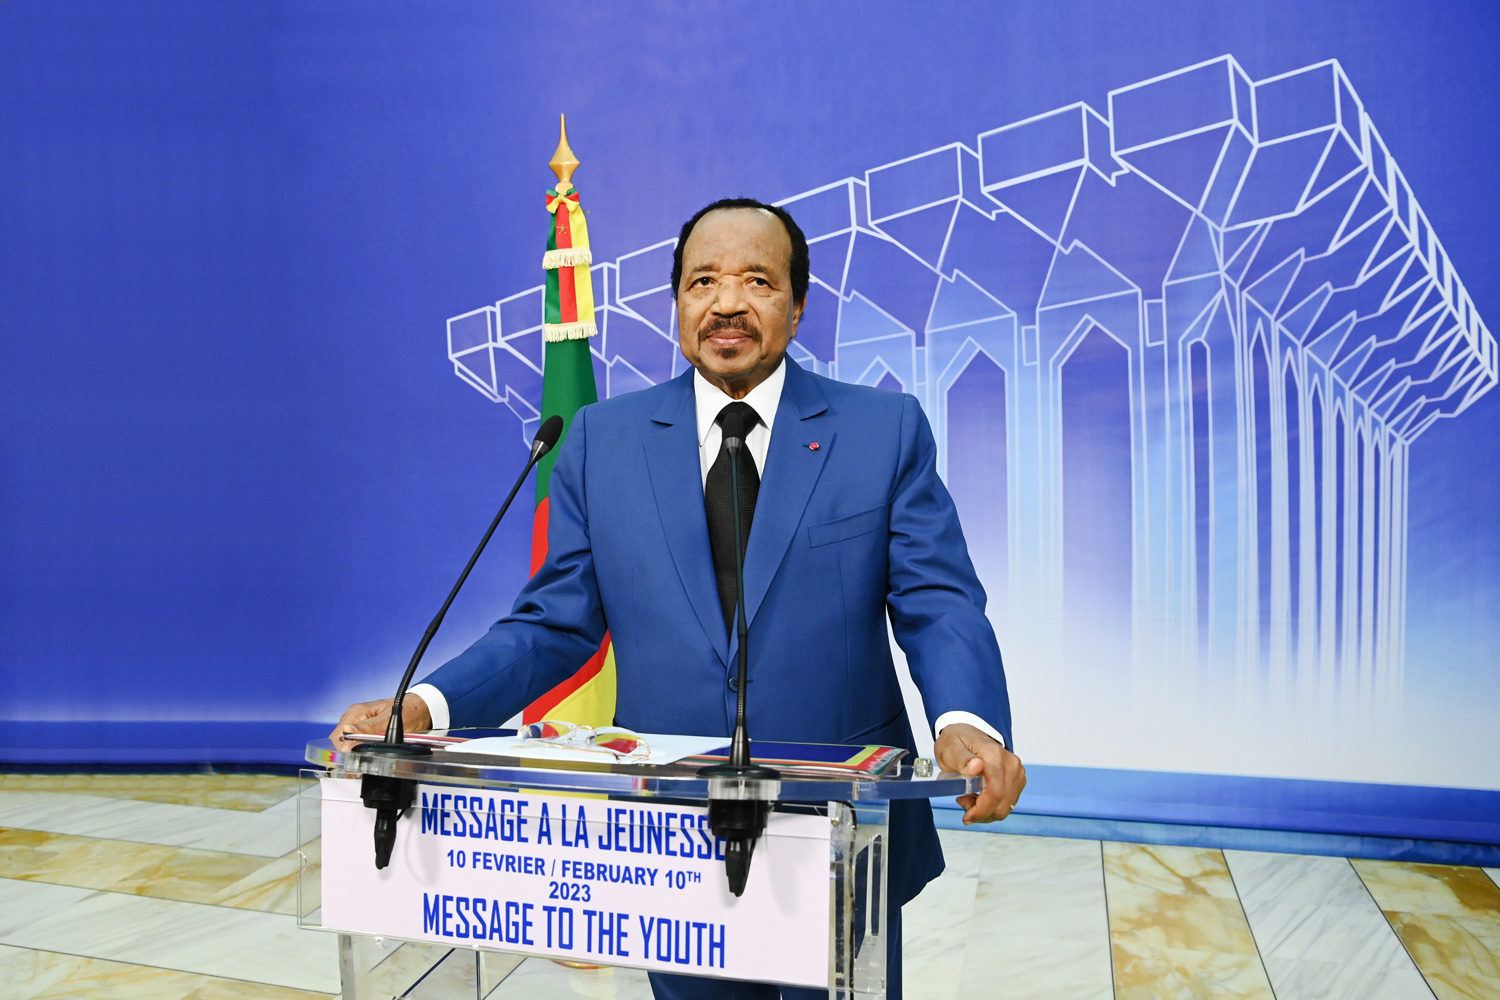 57th Edition of the Youth Day - Message to the Youth